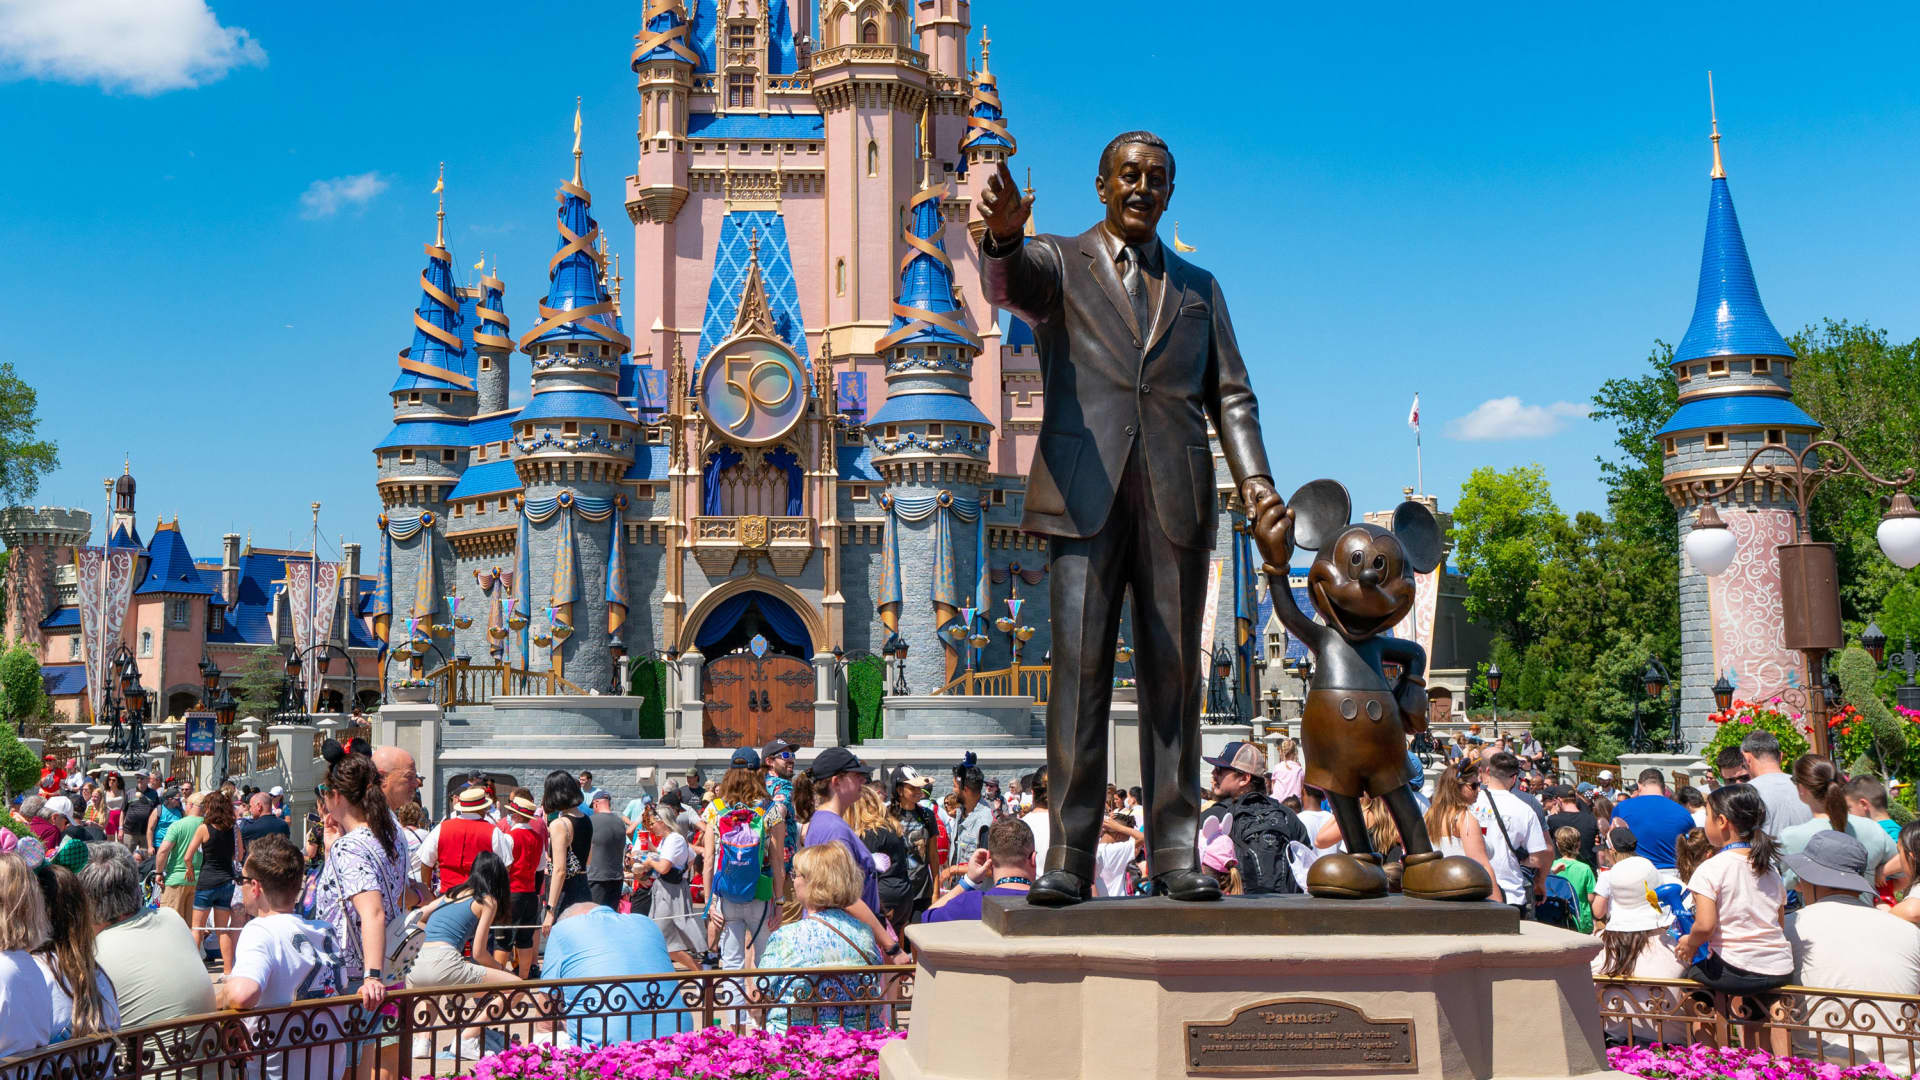 Disney to invest more in theme parks, cruises